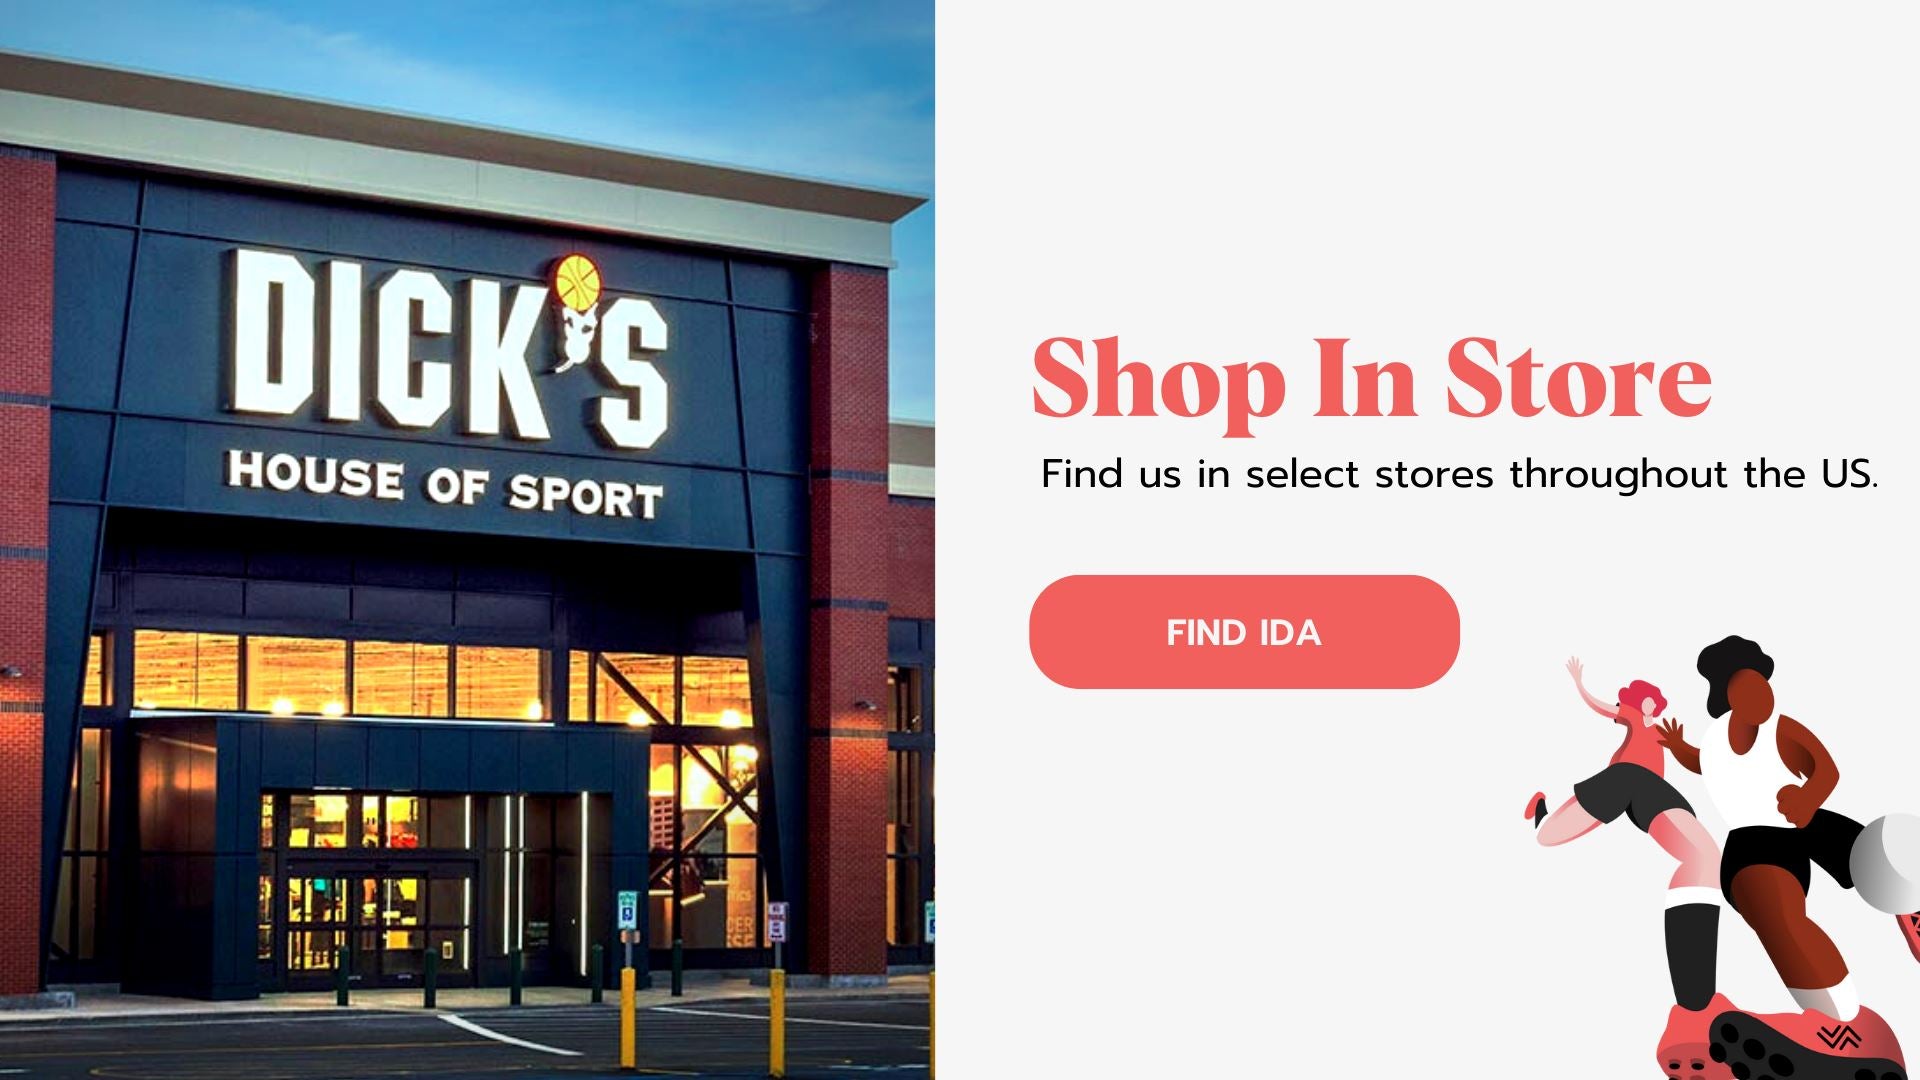 IDA Rise and IDA Centra hit select Dick's Sporting Goods stores